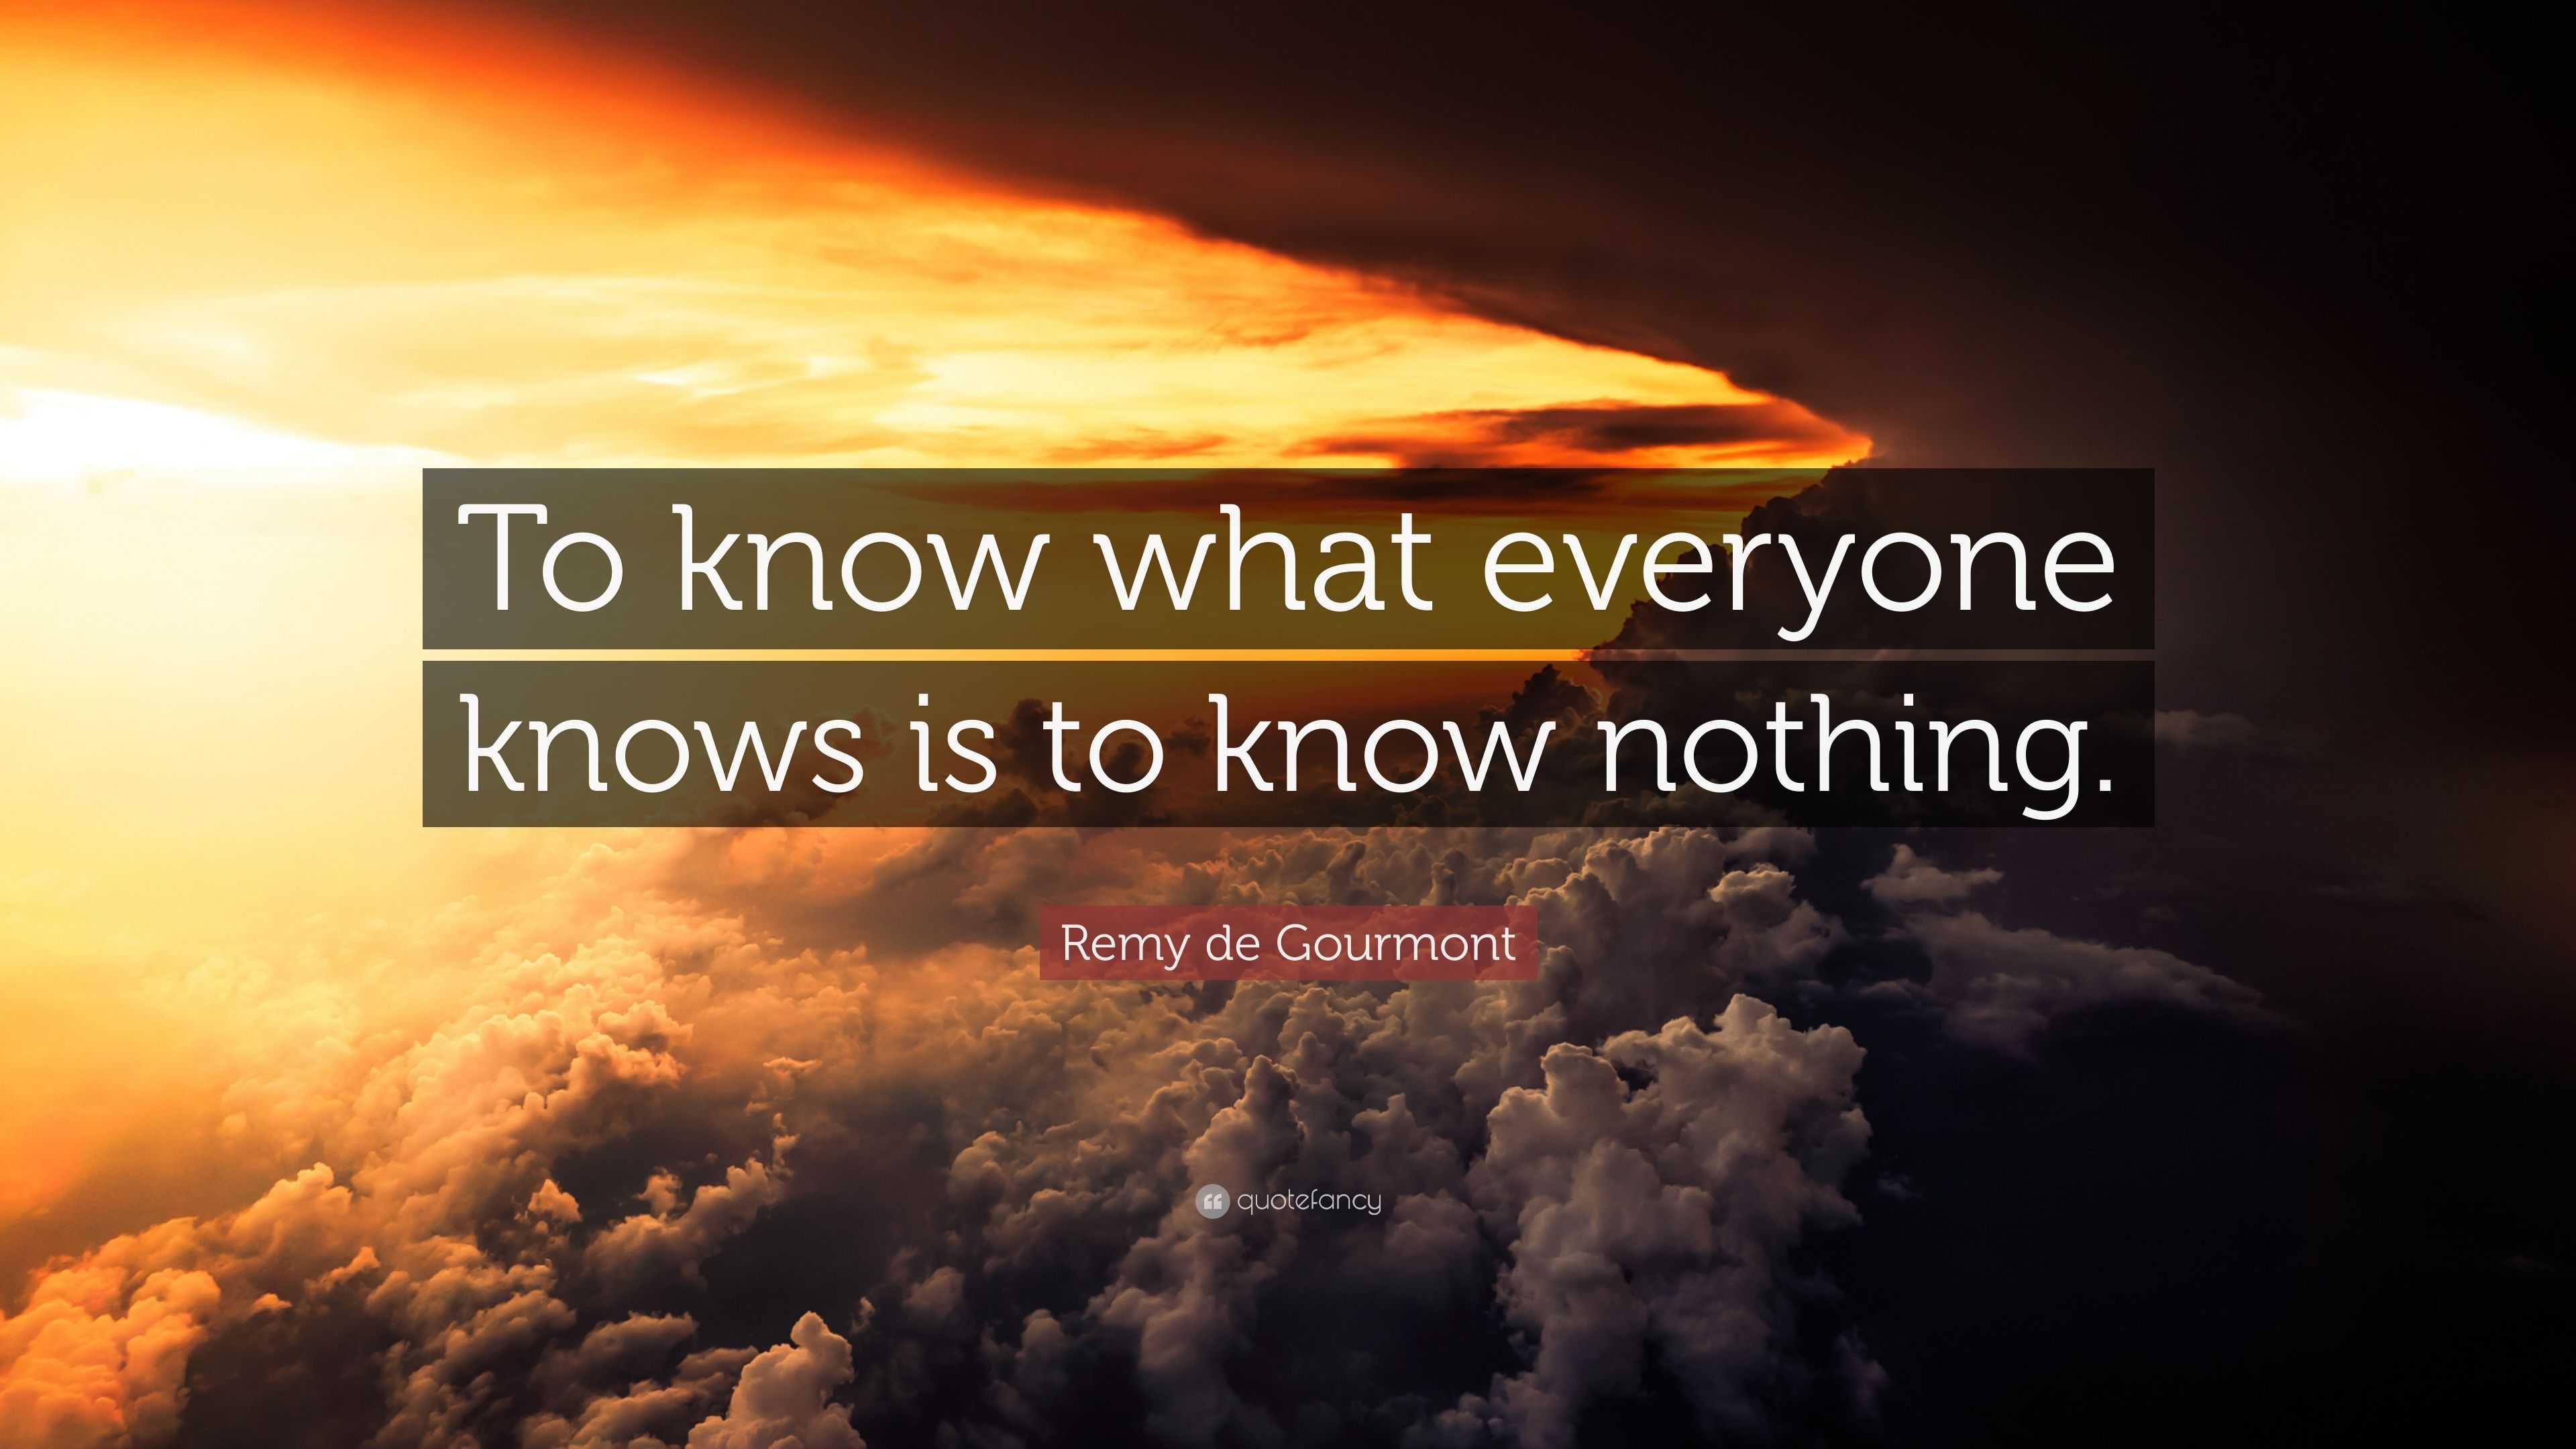 Remy de Gourmont Quote: “To know what everyone knows is to know 